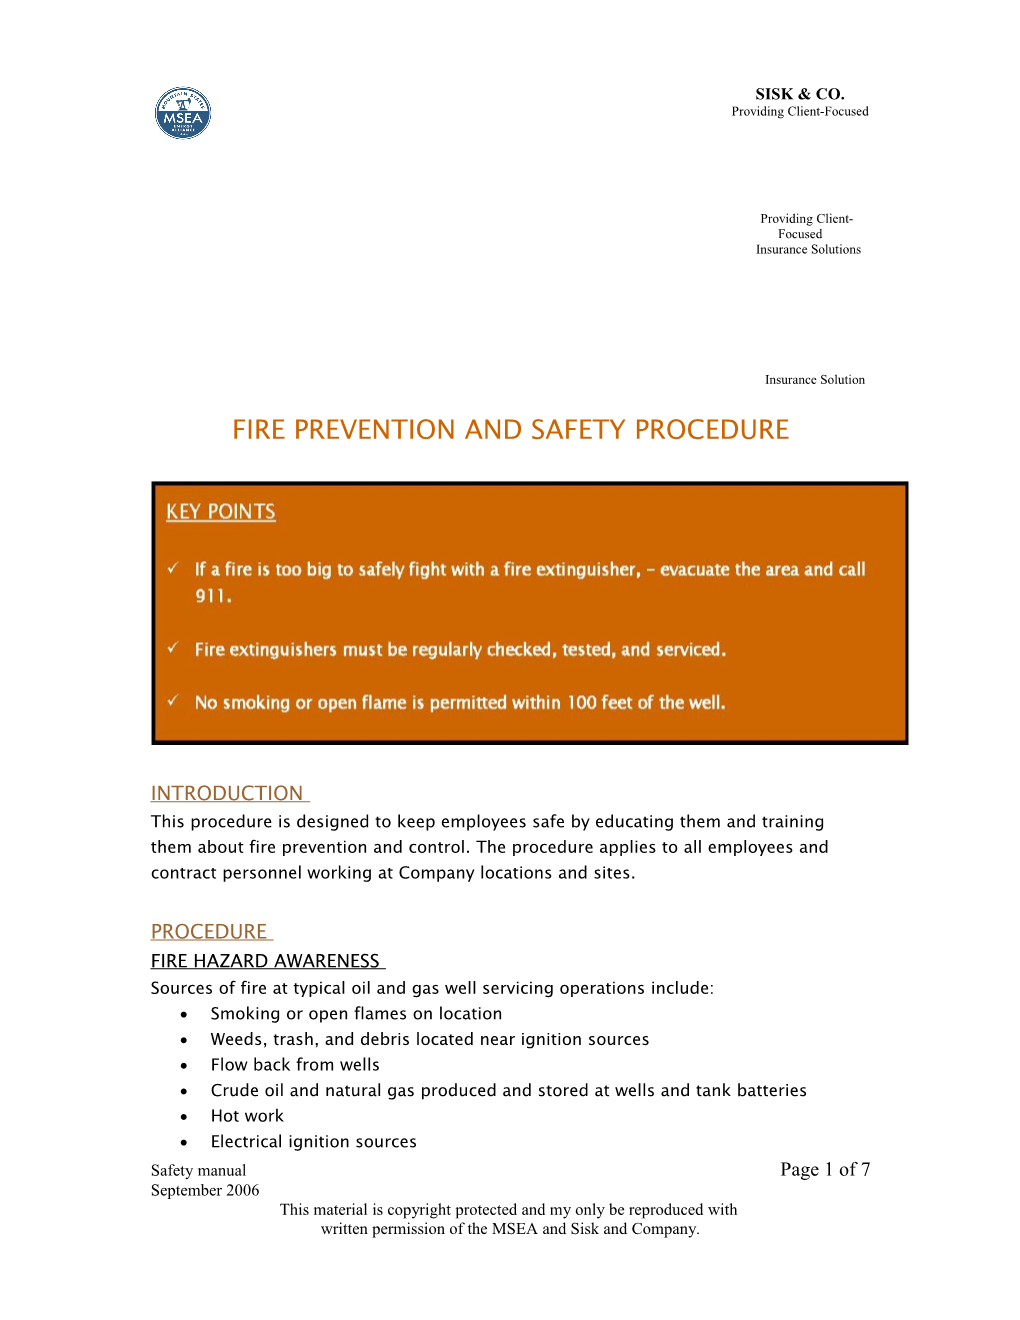 Fire Prevention and Safety Procedure